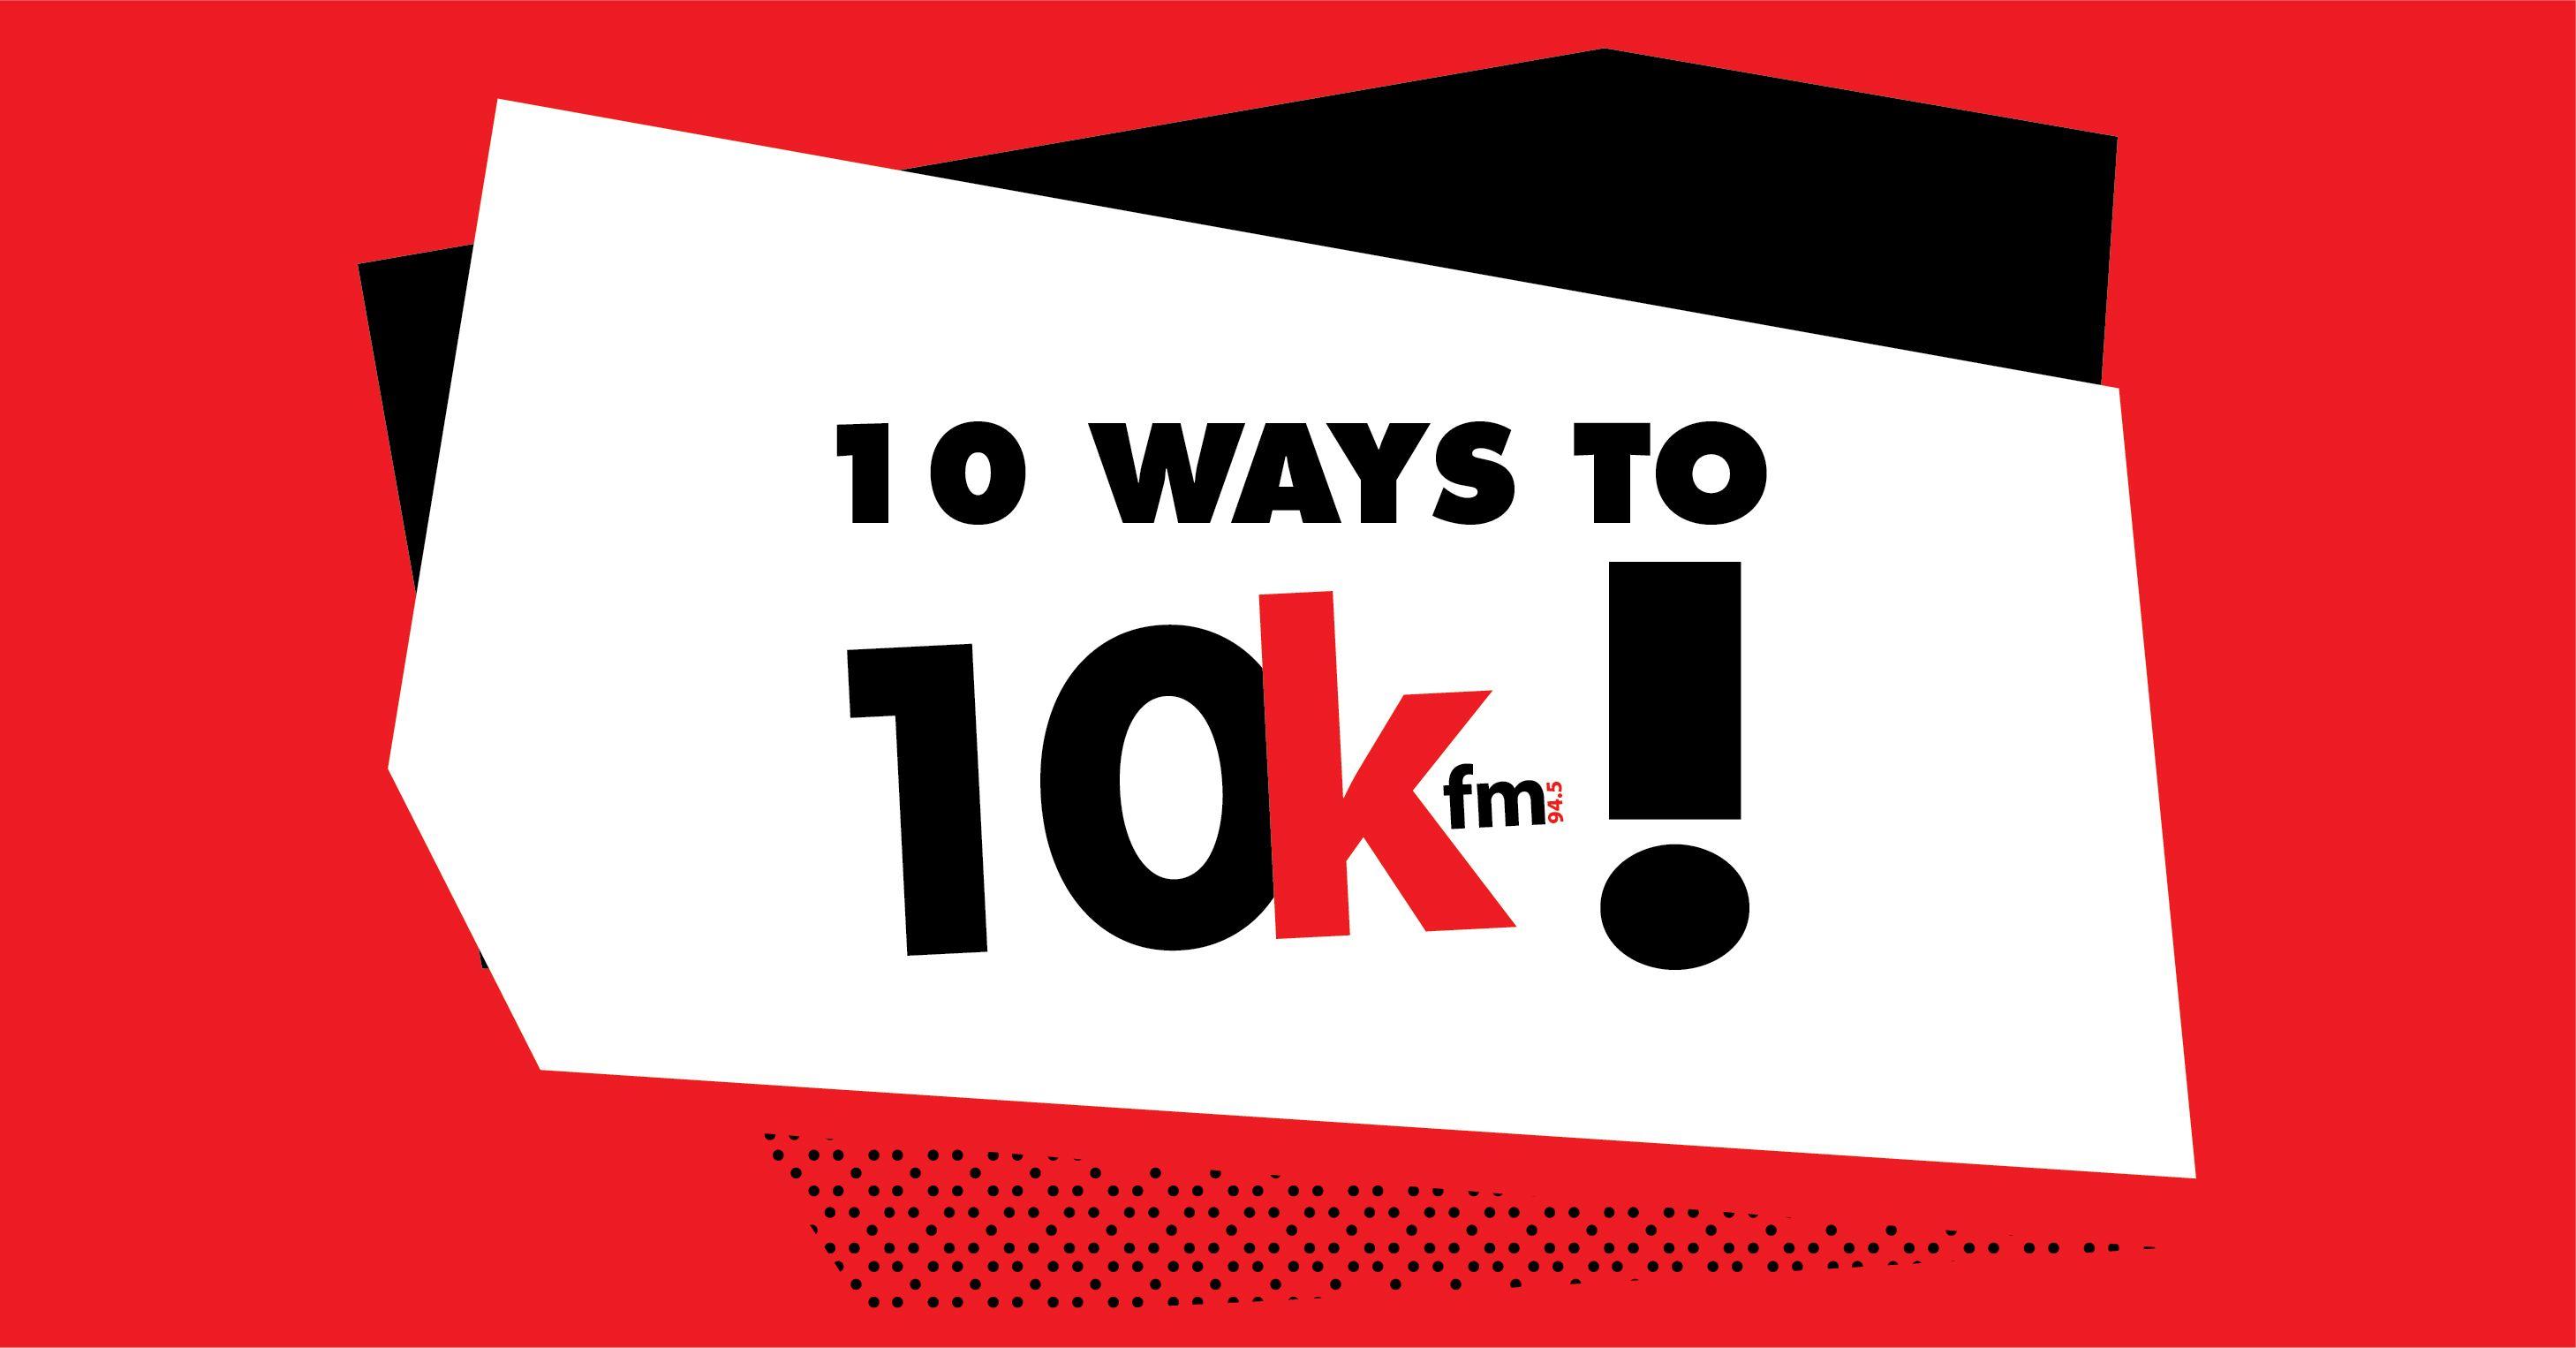 Big Red K Logo - Kfm 94.5 - Competitions - Find the Big Red K and win!